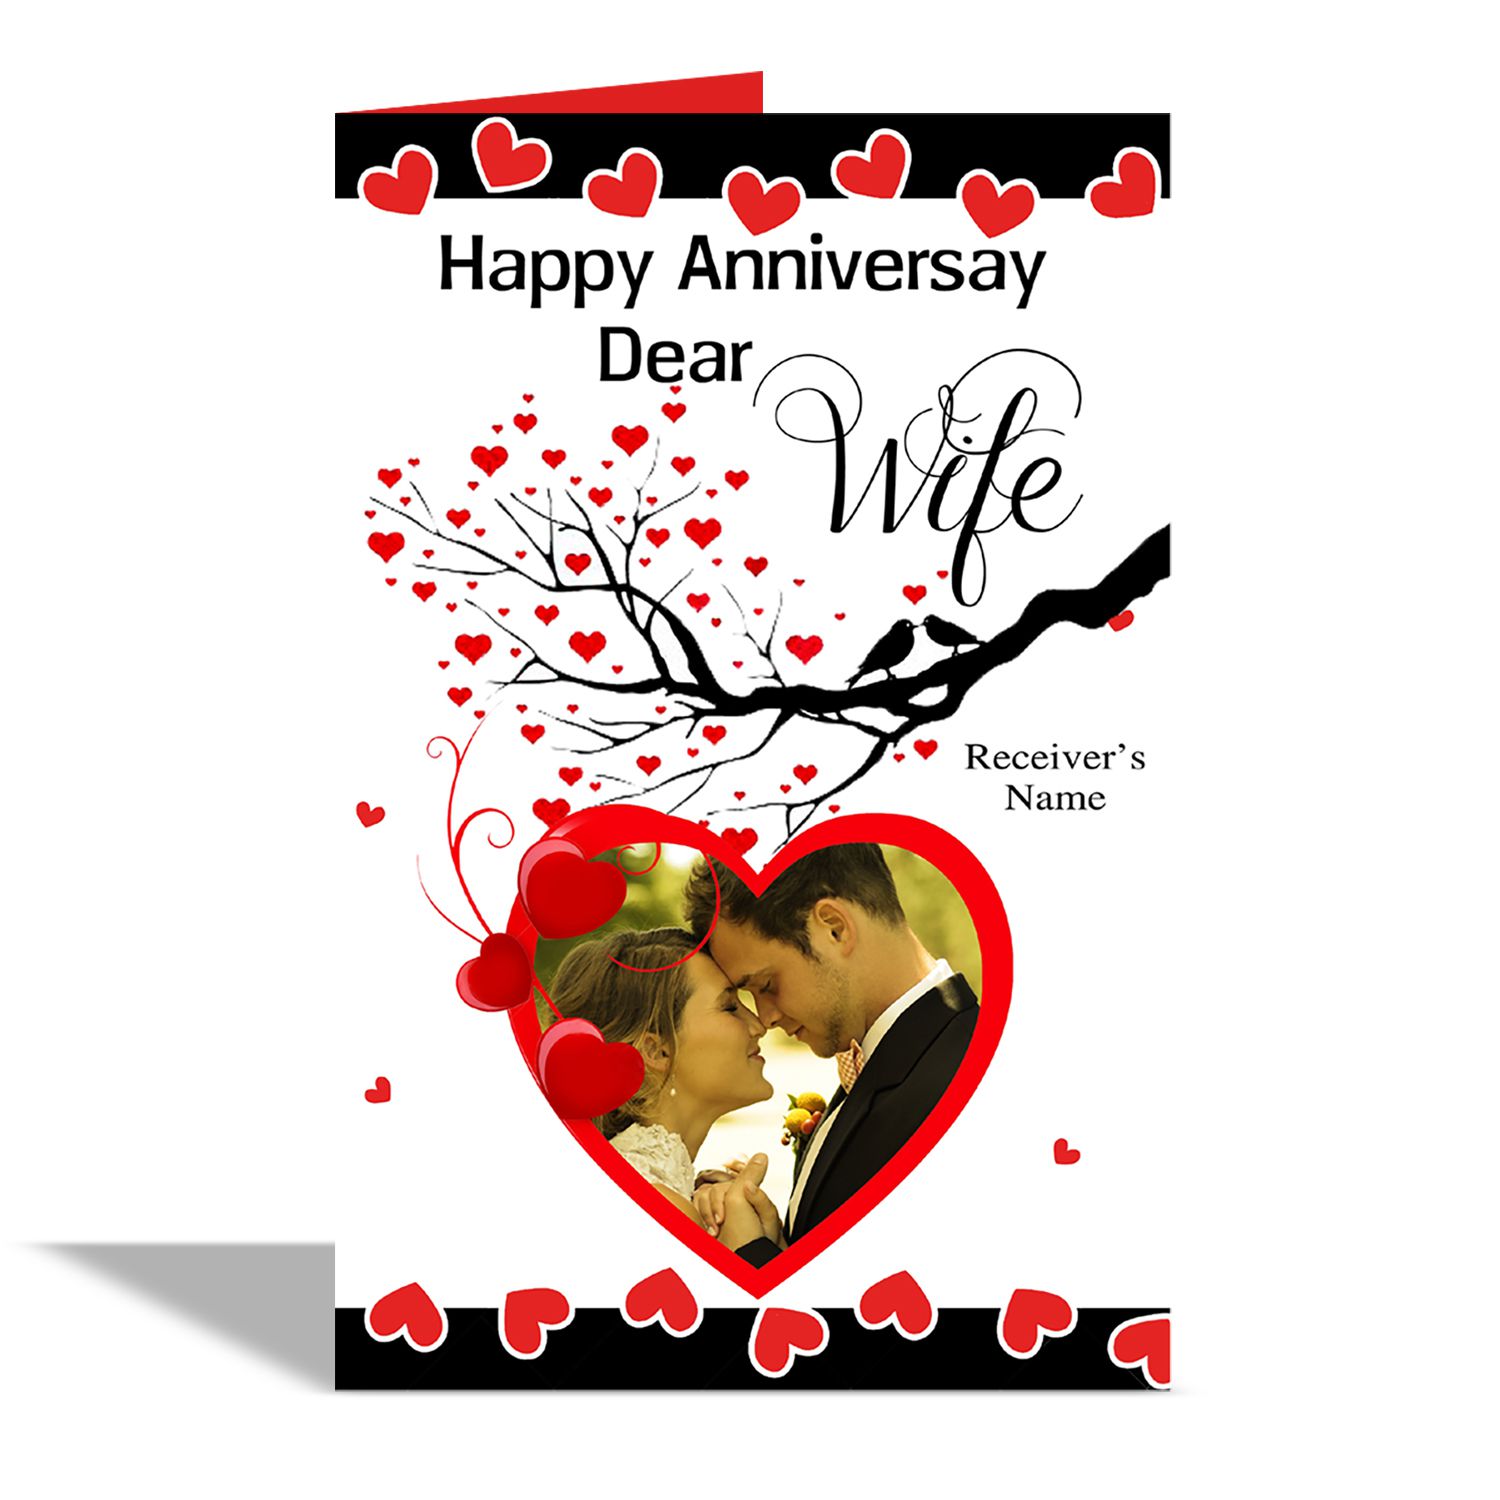 Alwayst Happy Anniversary Dear Wife Greeting Card Buy Online At